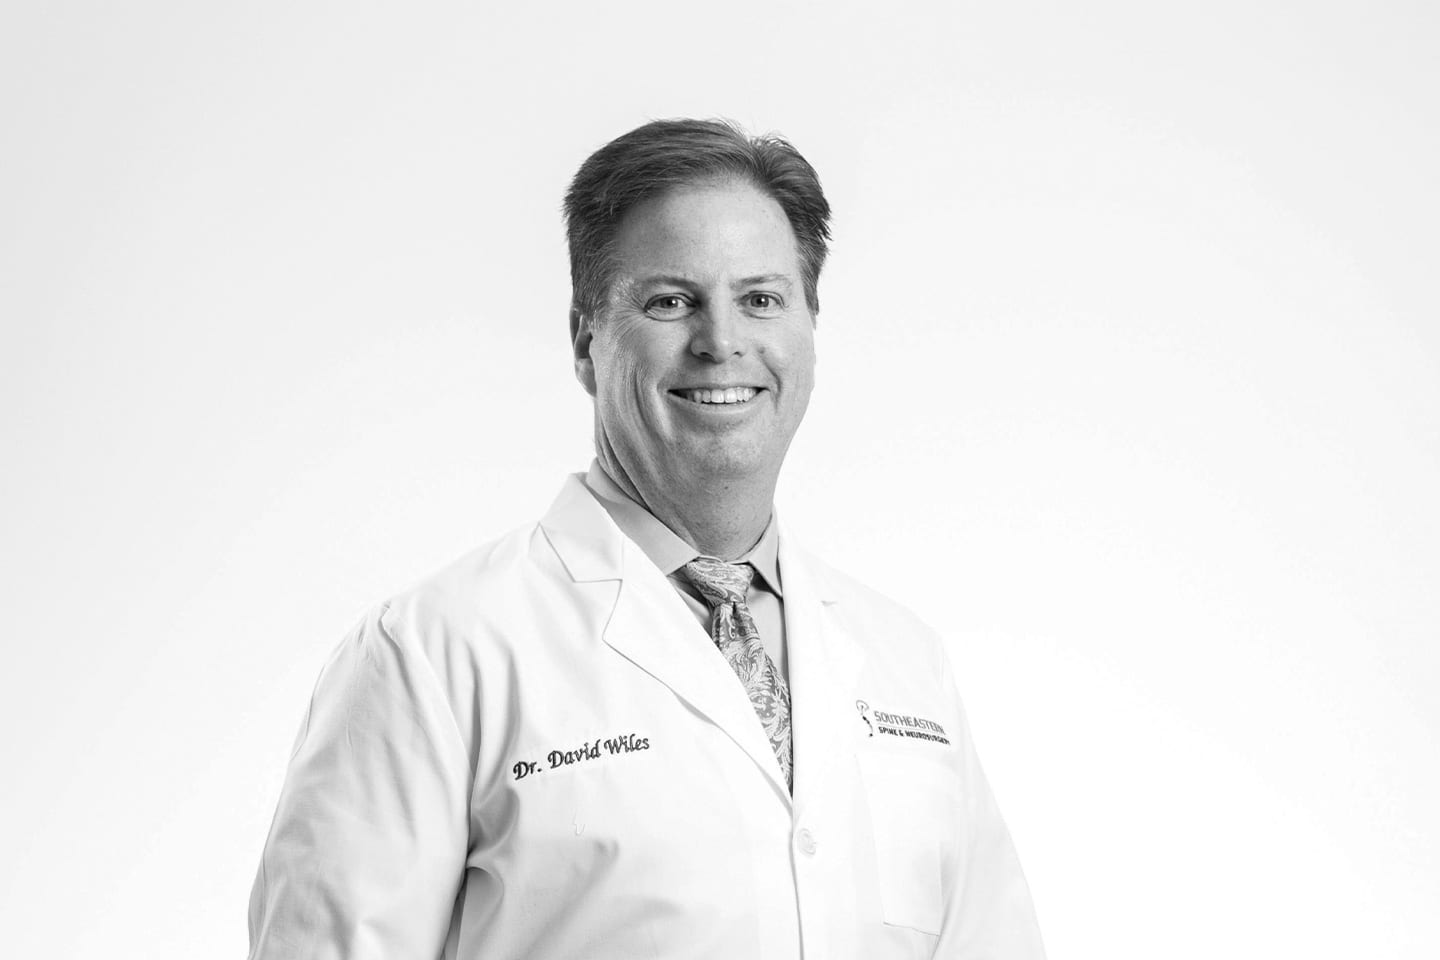 DR. DAVID A. WILES AT SOUTHEASTERN SPINE & NEUROSURGERY in chattanooga